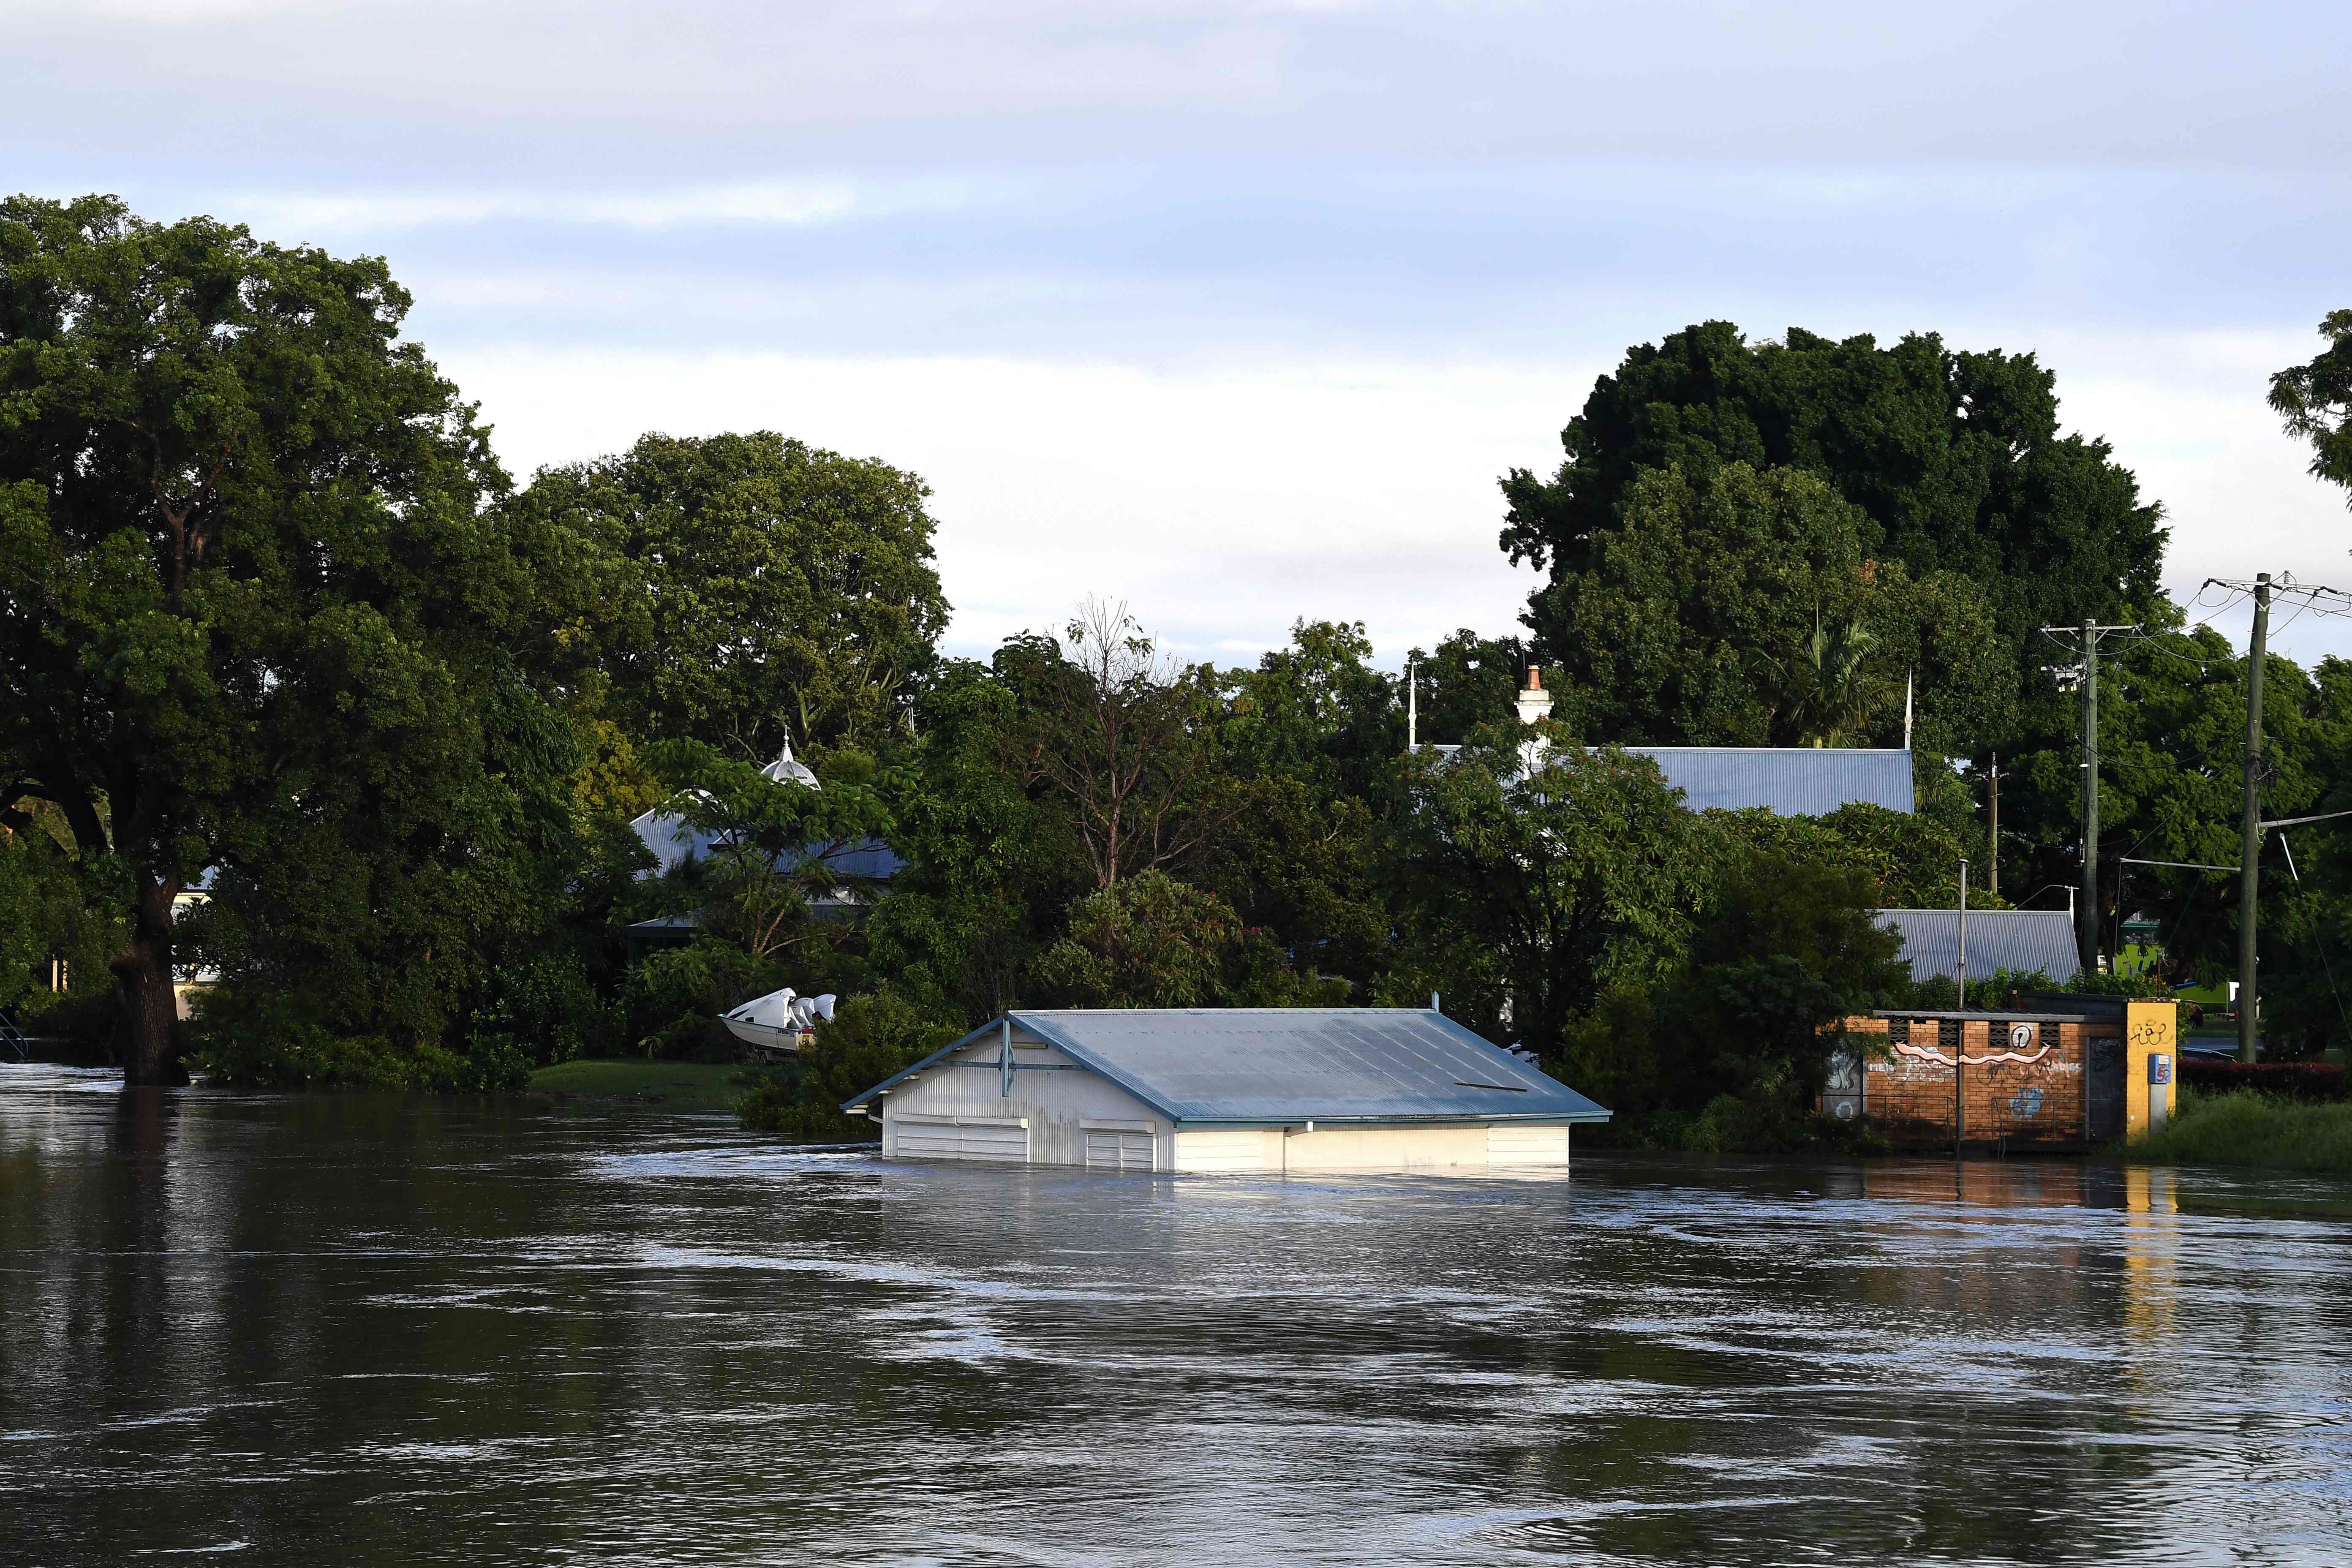 A submerged shed is seen on the bank of overflowing Clarence River in Grafton, some 130 kms from the New South Wales town Lismore on 1 March